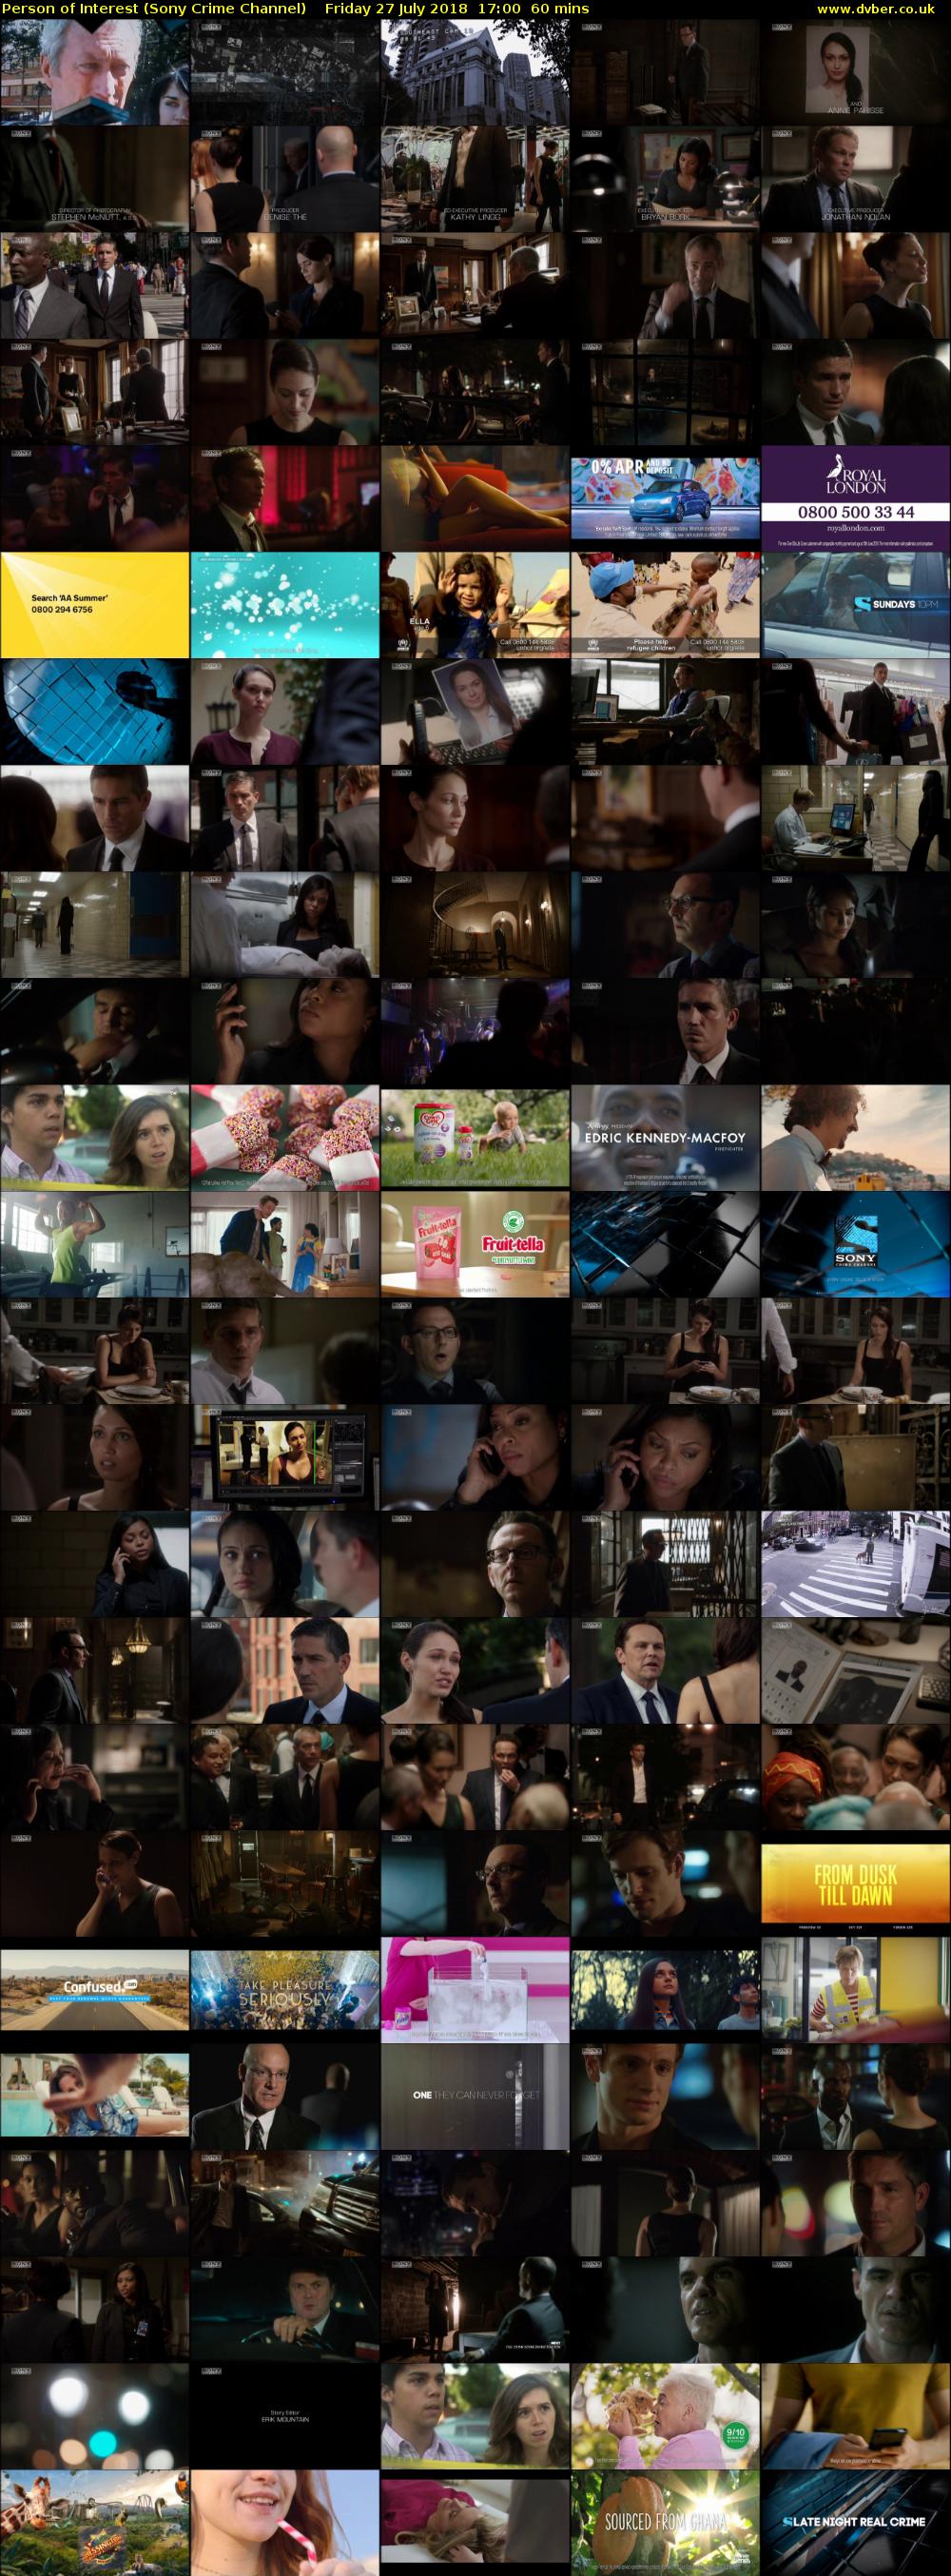 Person of Interest (Sony Crime Channel) Friday 27 July 2018 17:00 - 18:00